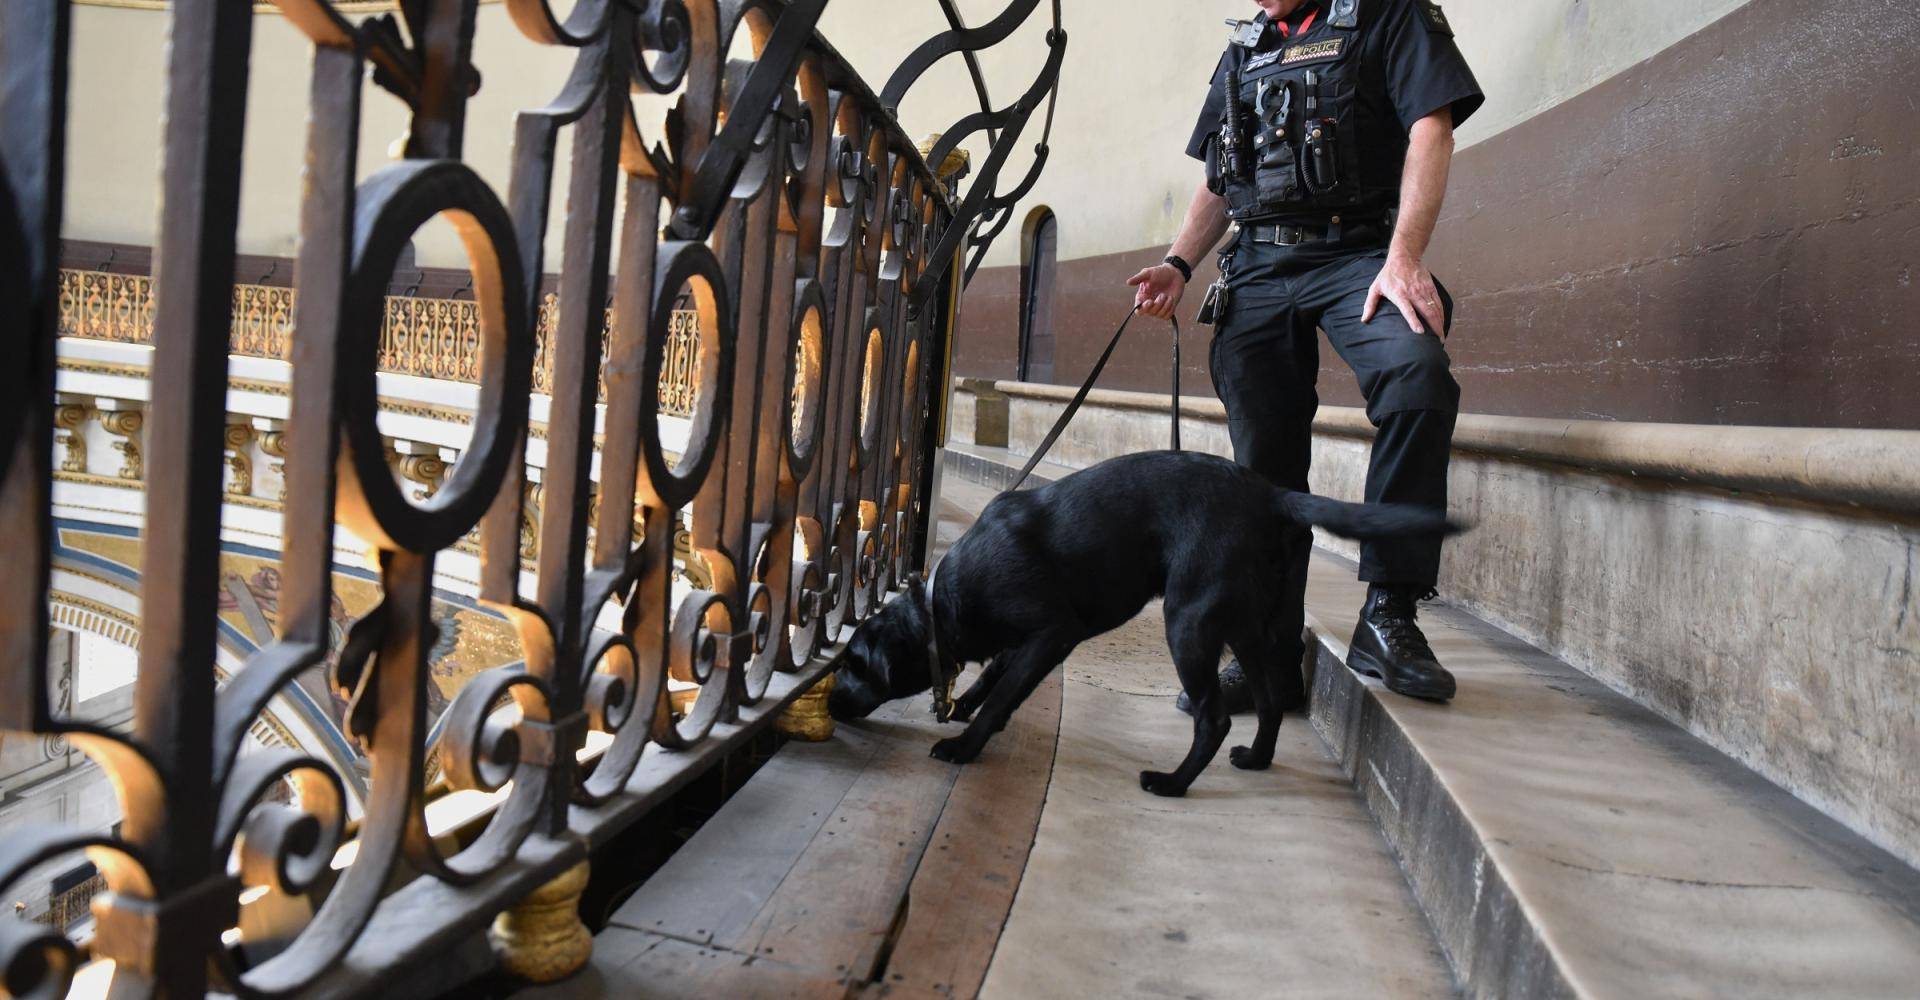 police guard dog security safety search